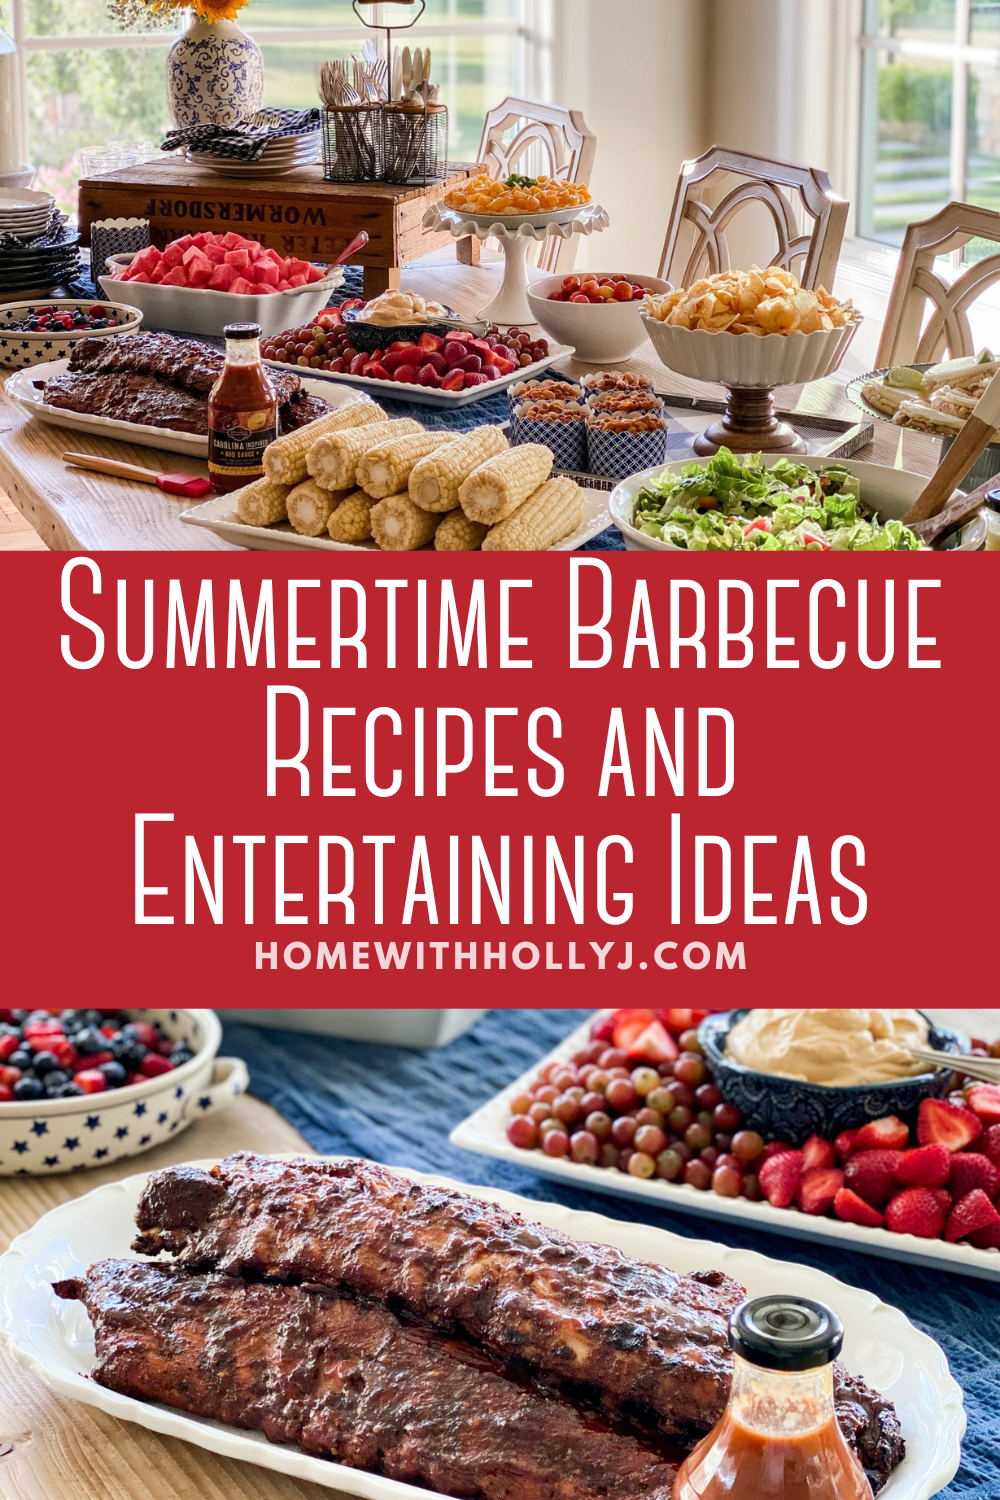 Sharing my all-time favorite summertime barbecue recipes including fresh peach pie and a beautiful tablescape for entertaining guests